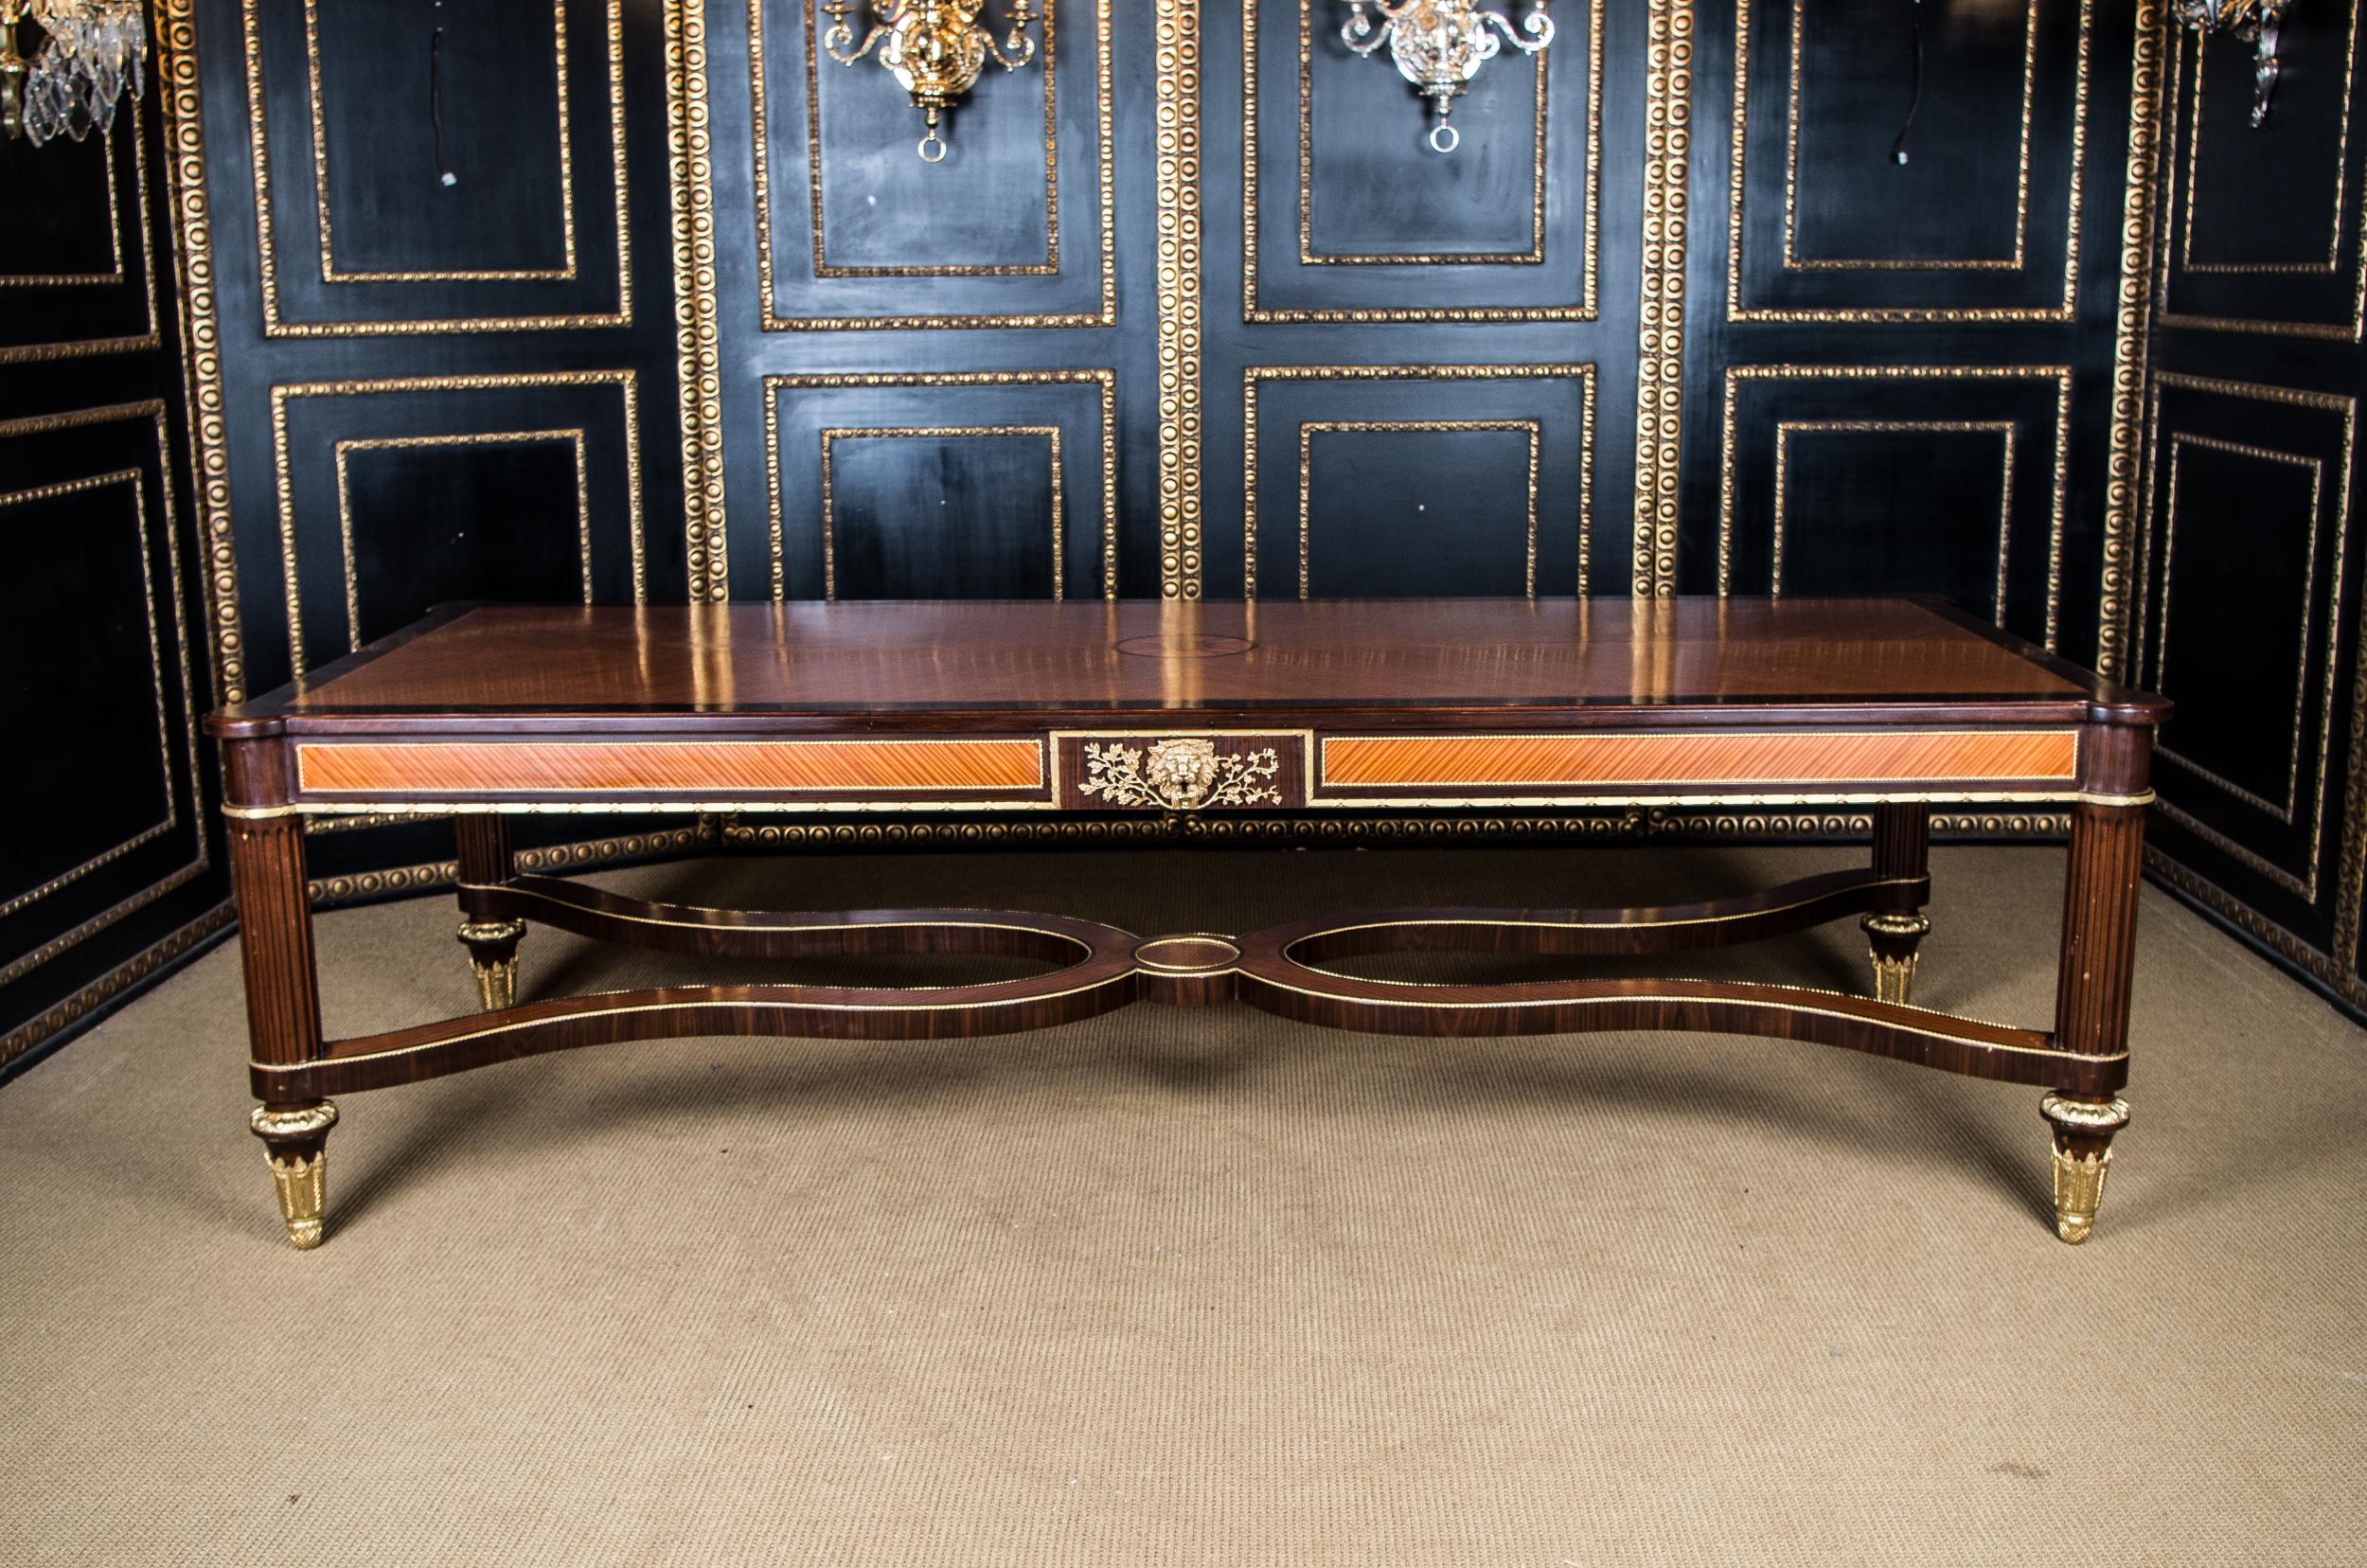 Slightly modified model after the Château Fontainebleau Maria Antoinette chest of drawers,
Joseph Stockel u. Guillaume Benneman.
Bois-Satiné veneer, all-over widespread mirror veneer on solid softwood.
Please note that this table is delivered in